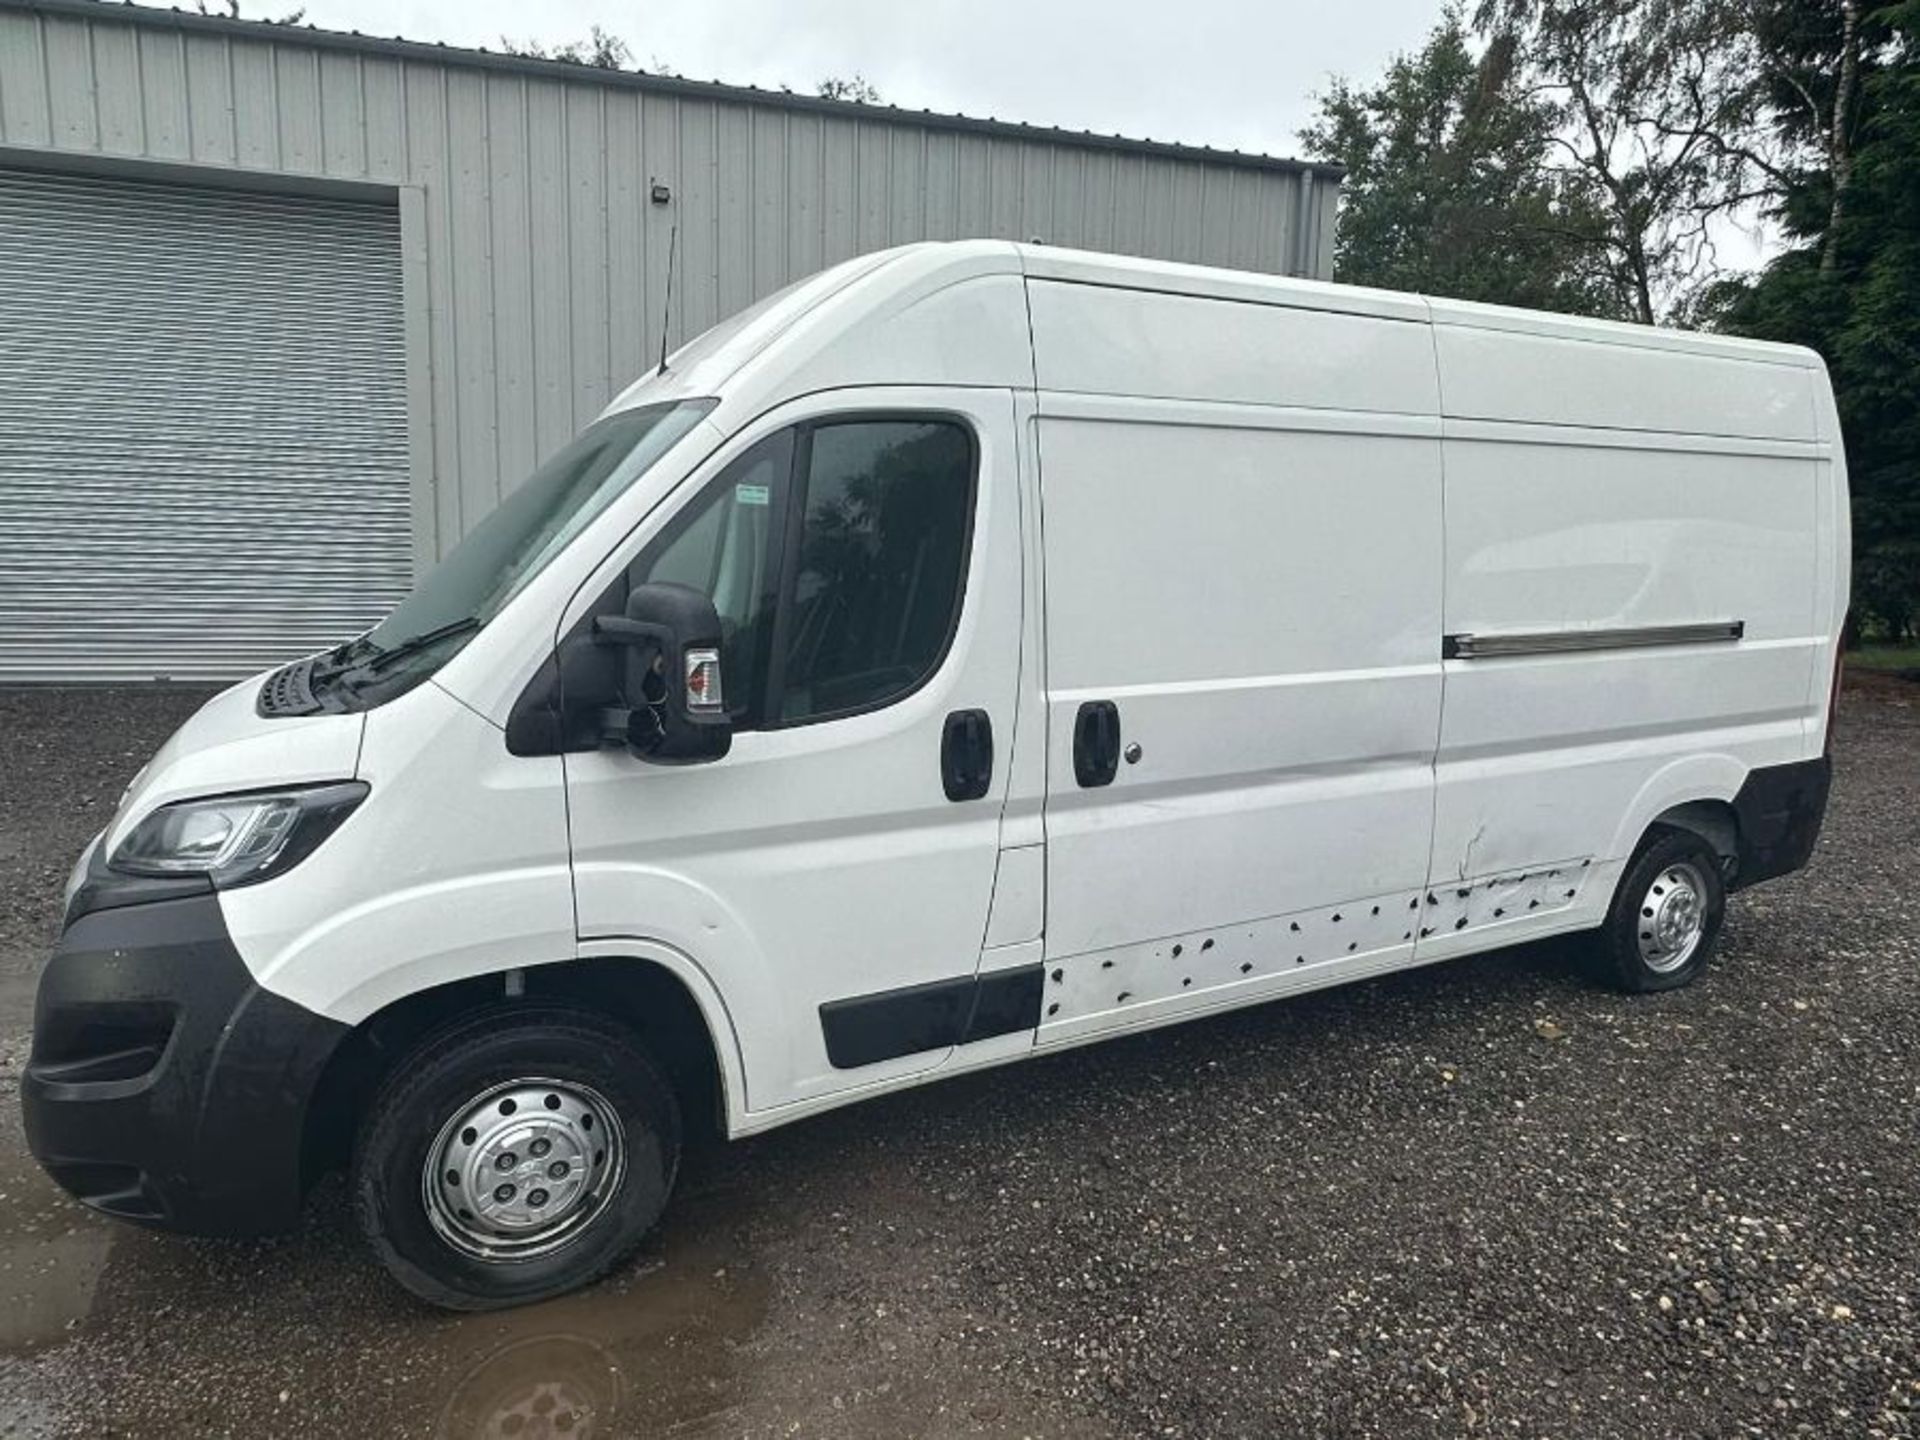 2021 21 PEUGEOT BOXER PROFESSIONAL PANEL VAN - 34K MILE - AIR CON - PLY LINED.